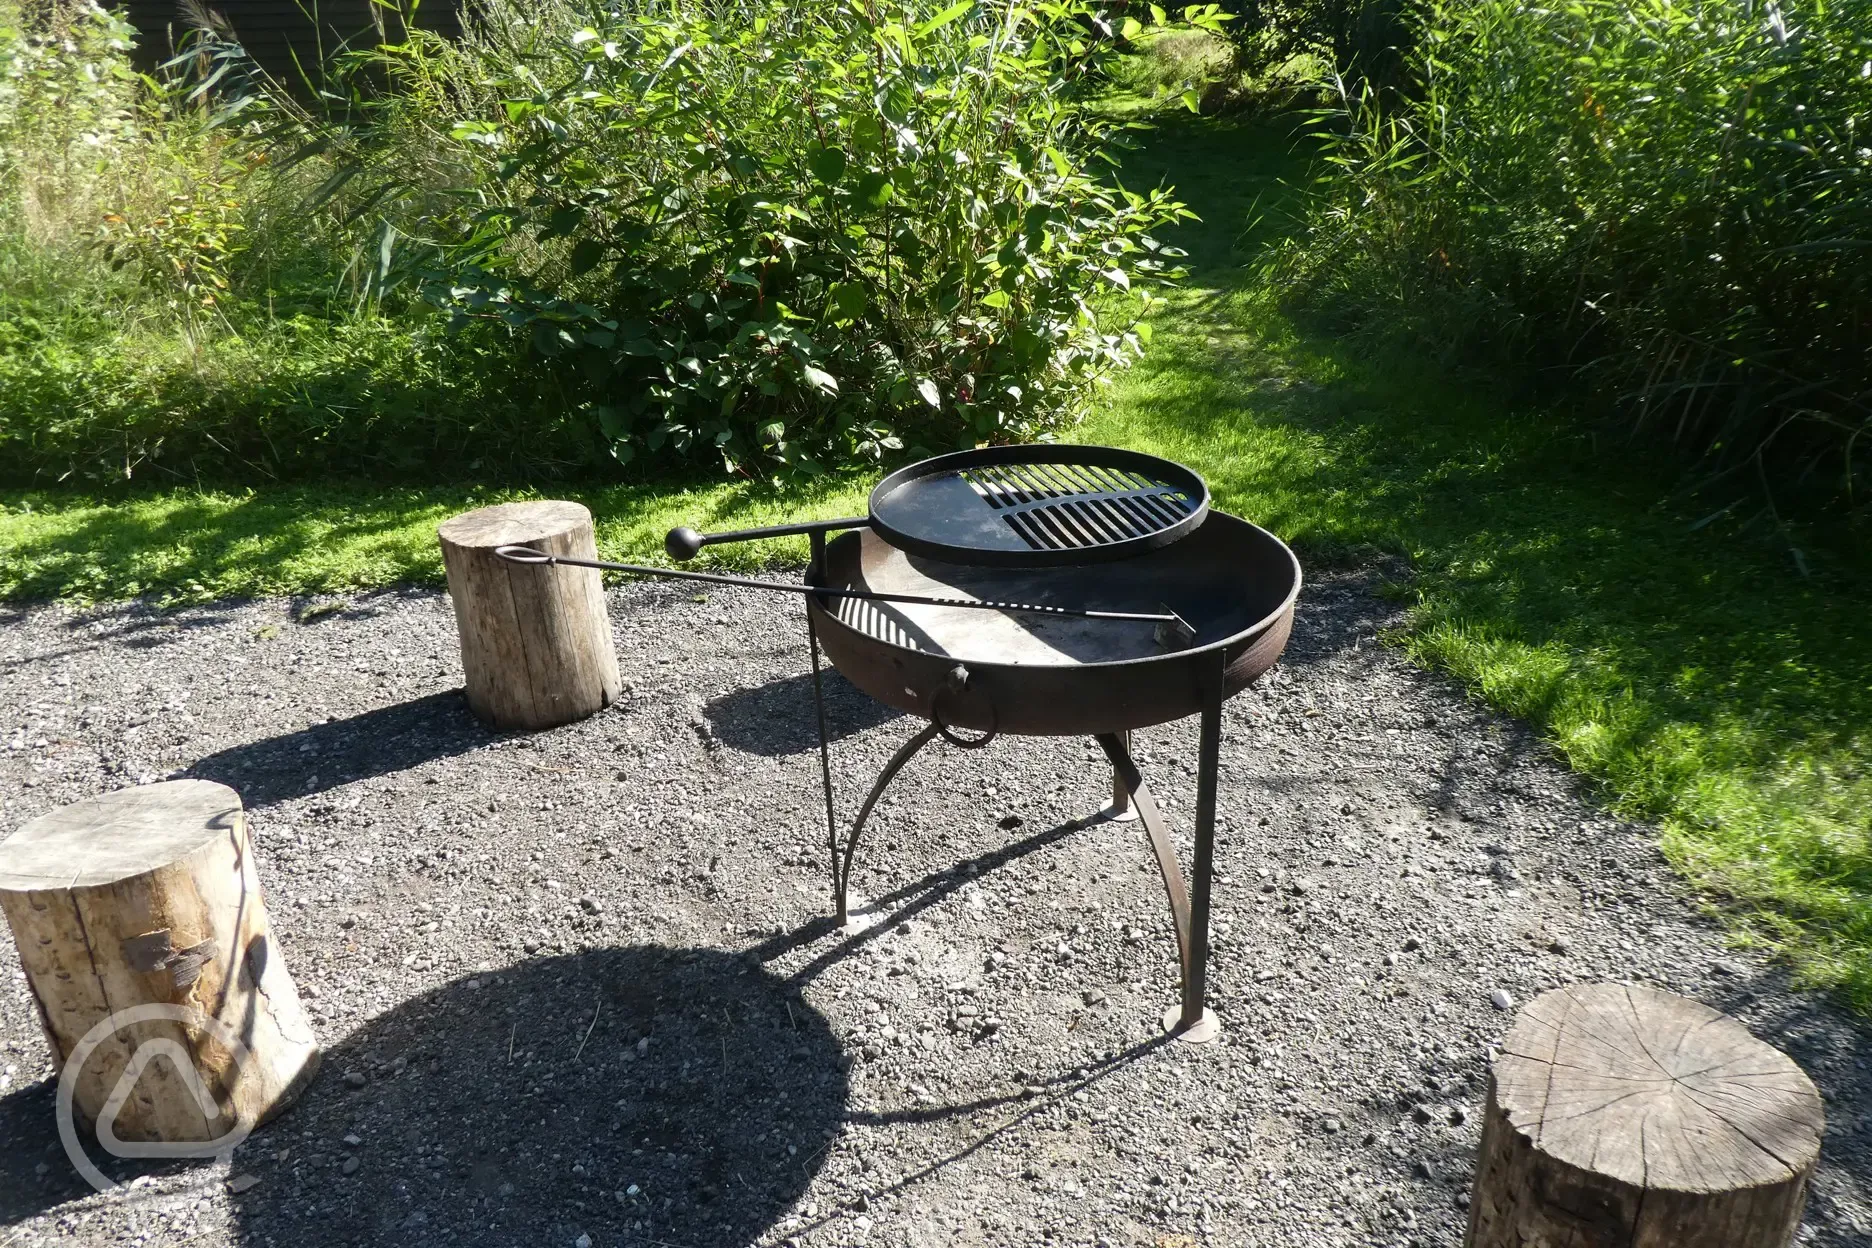 Private fire pit and BBQ grill